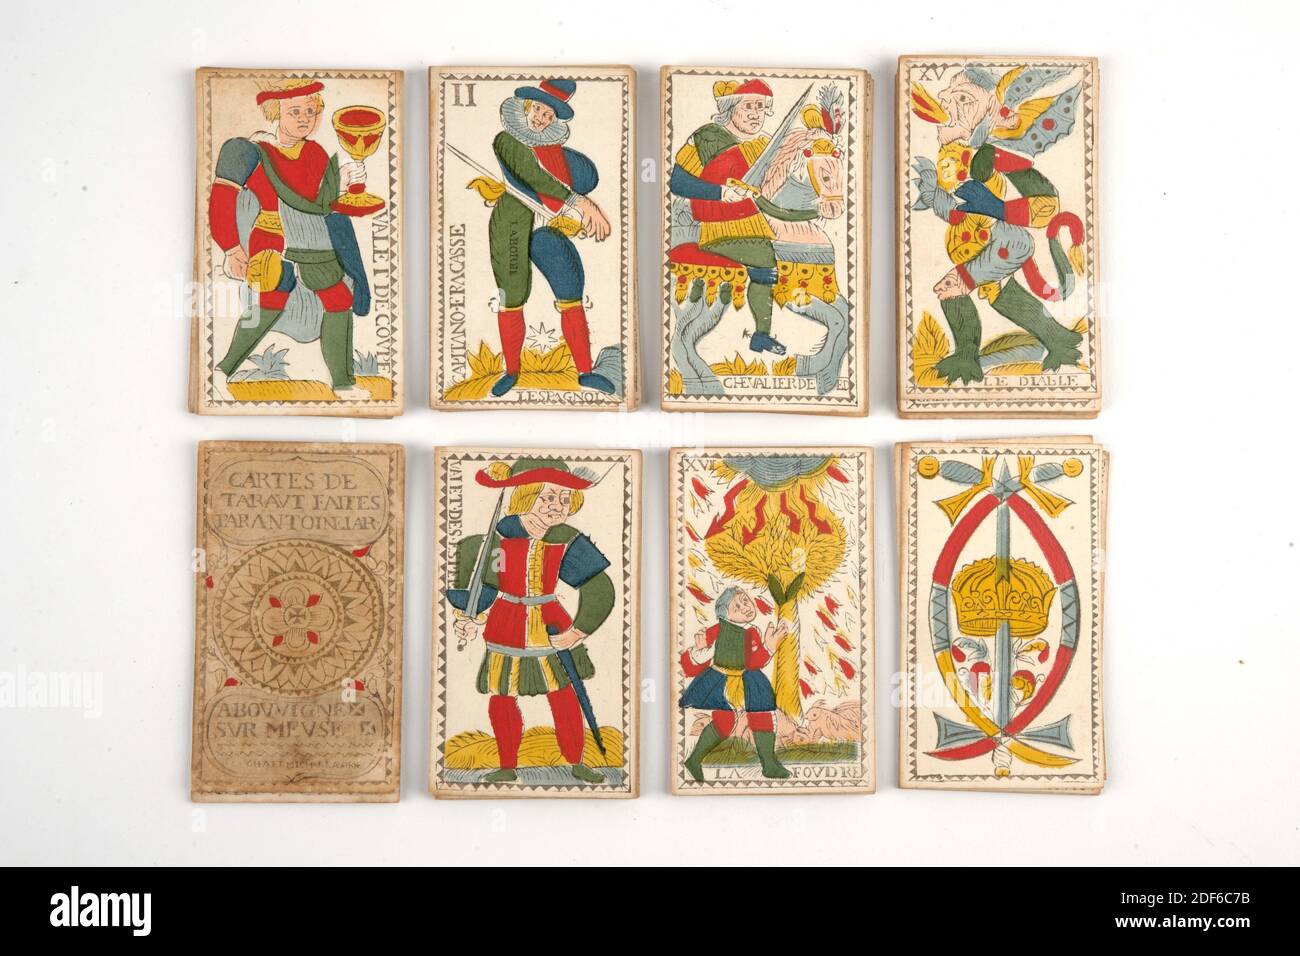 playing cards, Antoine Iar, first half 18th century, Front card, top: Antoine Iar, General: 6.8 x 11.6cm (68 x 116mm), Playing cards tarot of paper with engraved and colored scenes. The game consists of four series 1-10 with valet, chevalier, reine and roy. The series are deniez, coupe, espee and baston. Italian type. On the front card: Cartes de Taraut faites par Antoine Iar, underneath ornament, below a Bouvigne sur Meuse, below [MI] CHAEL MICH I LA BORNE, 1901 Stock Photo